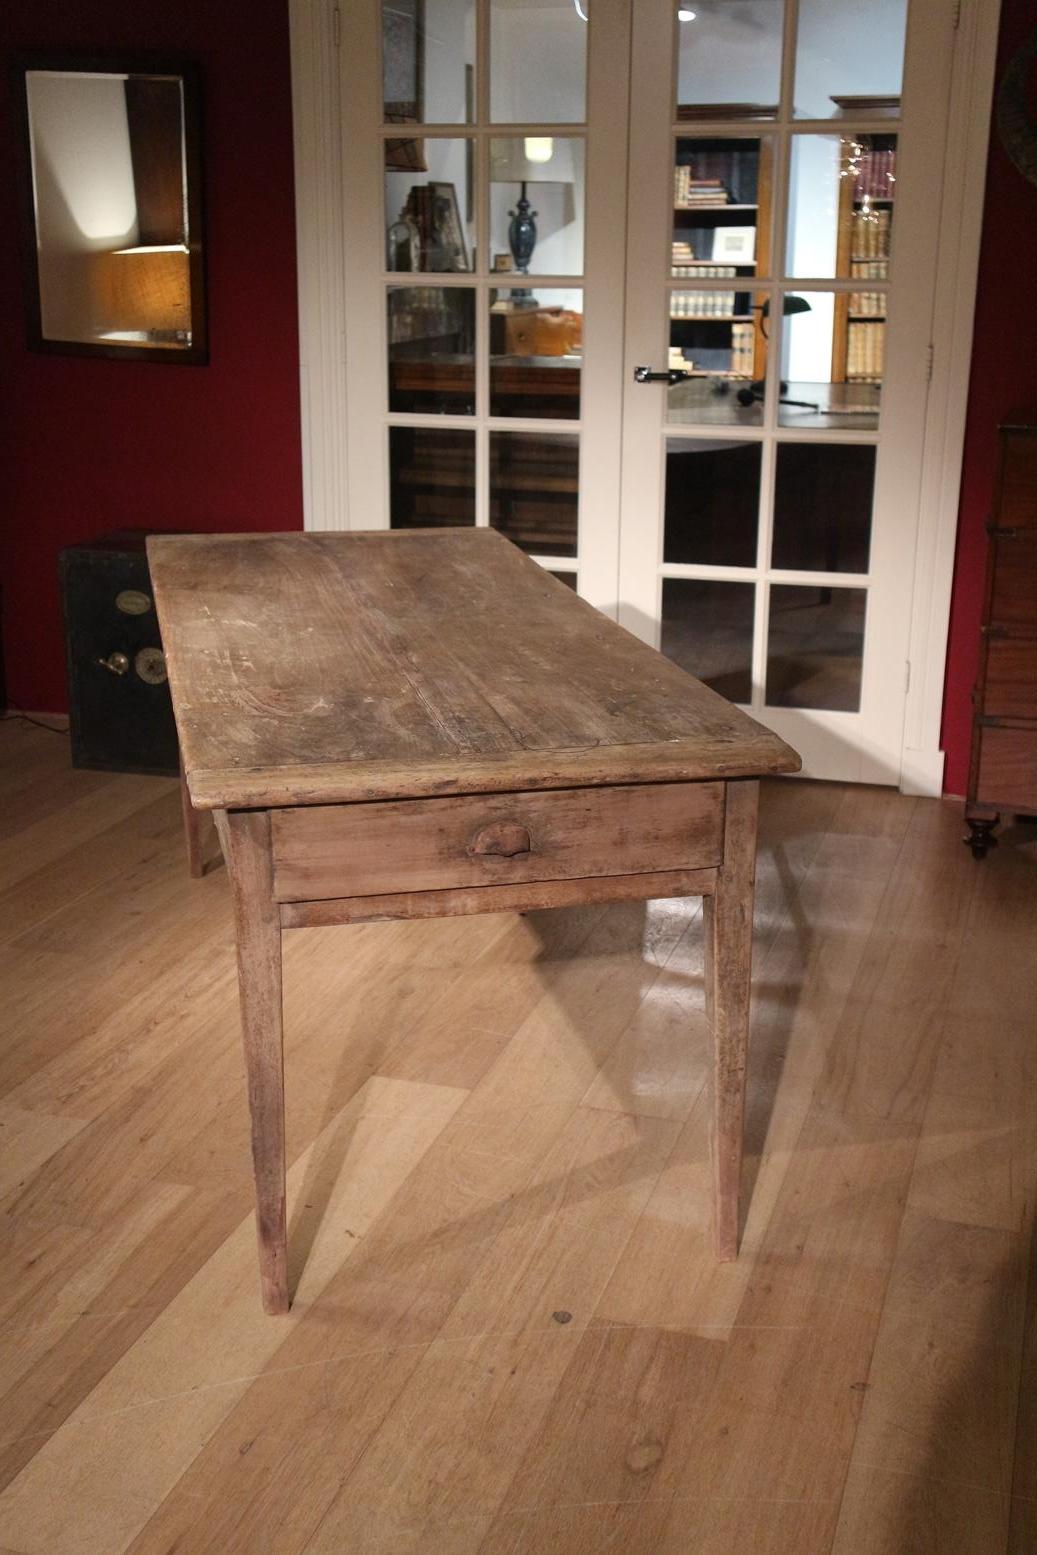 Antique French cherry wood dining room table in completely original condition. Table has 2 drawers. The table is in very good condition. All joints have been glued again, but the outside has been left untouched

Origin: France

Period: 19th